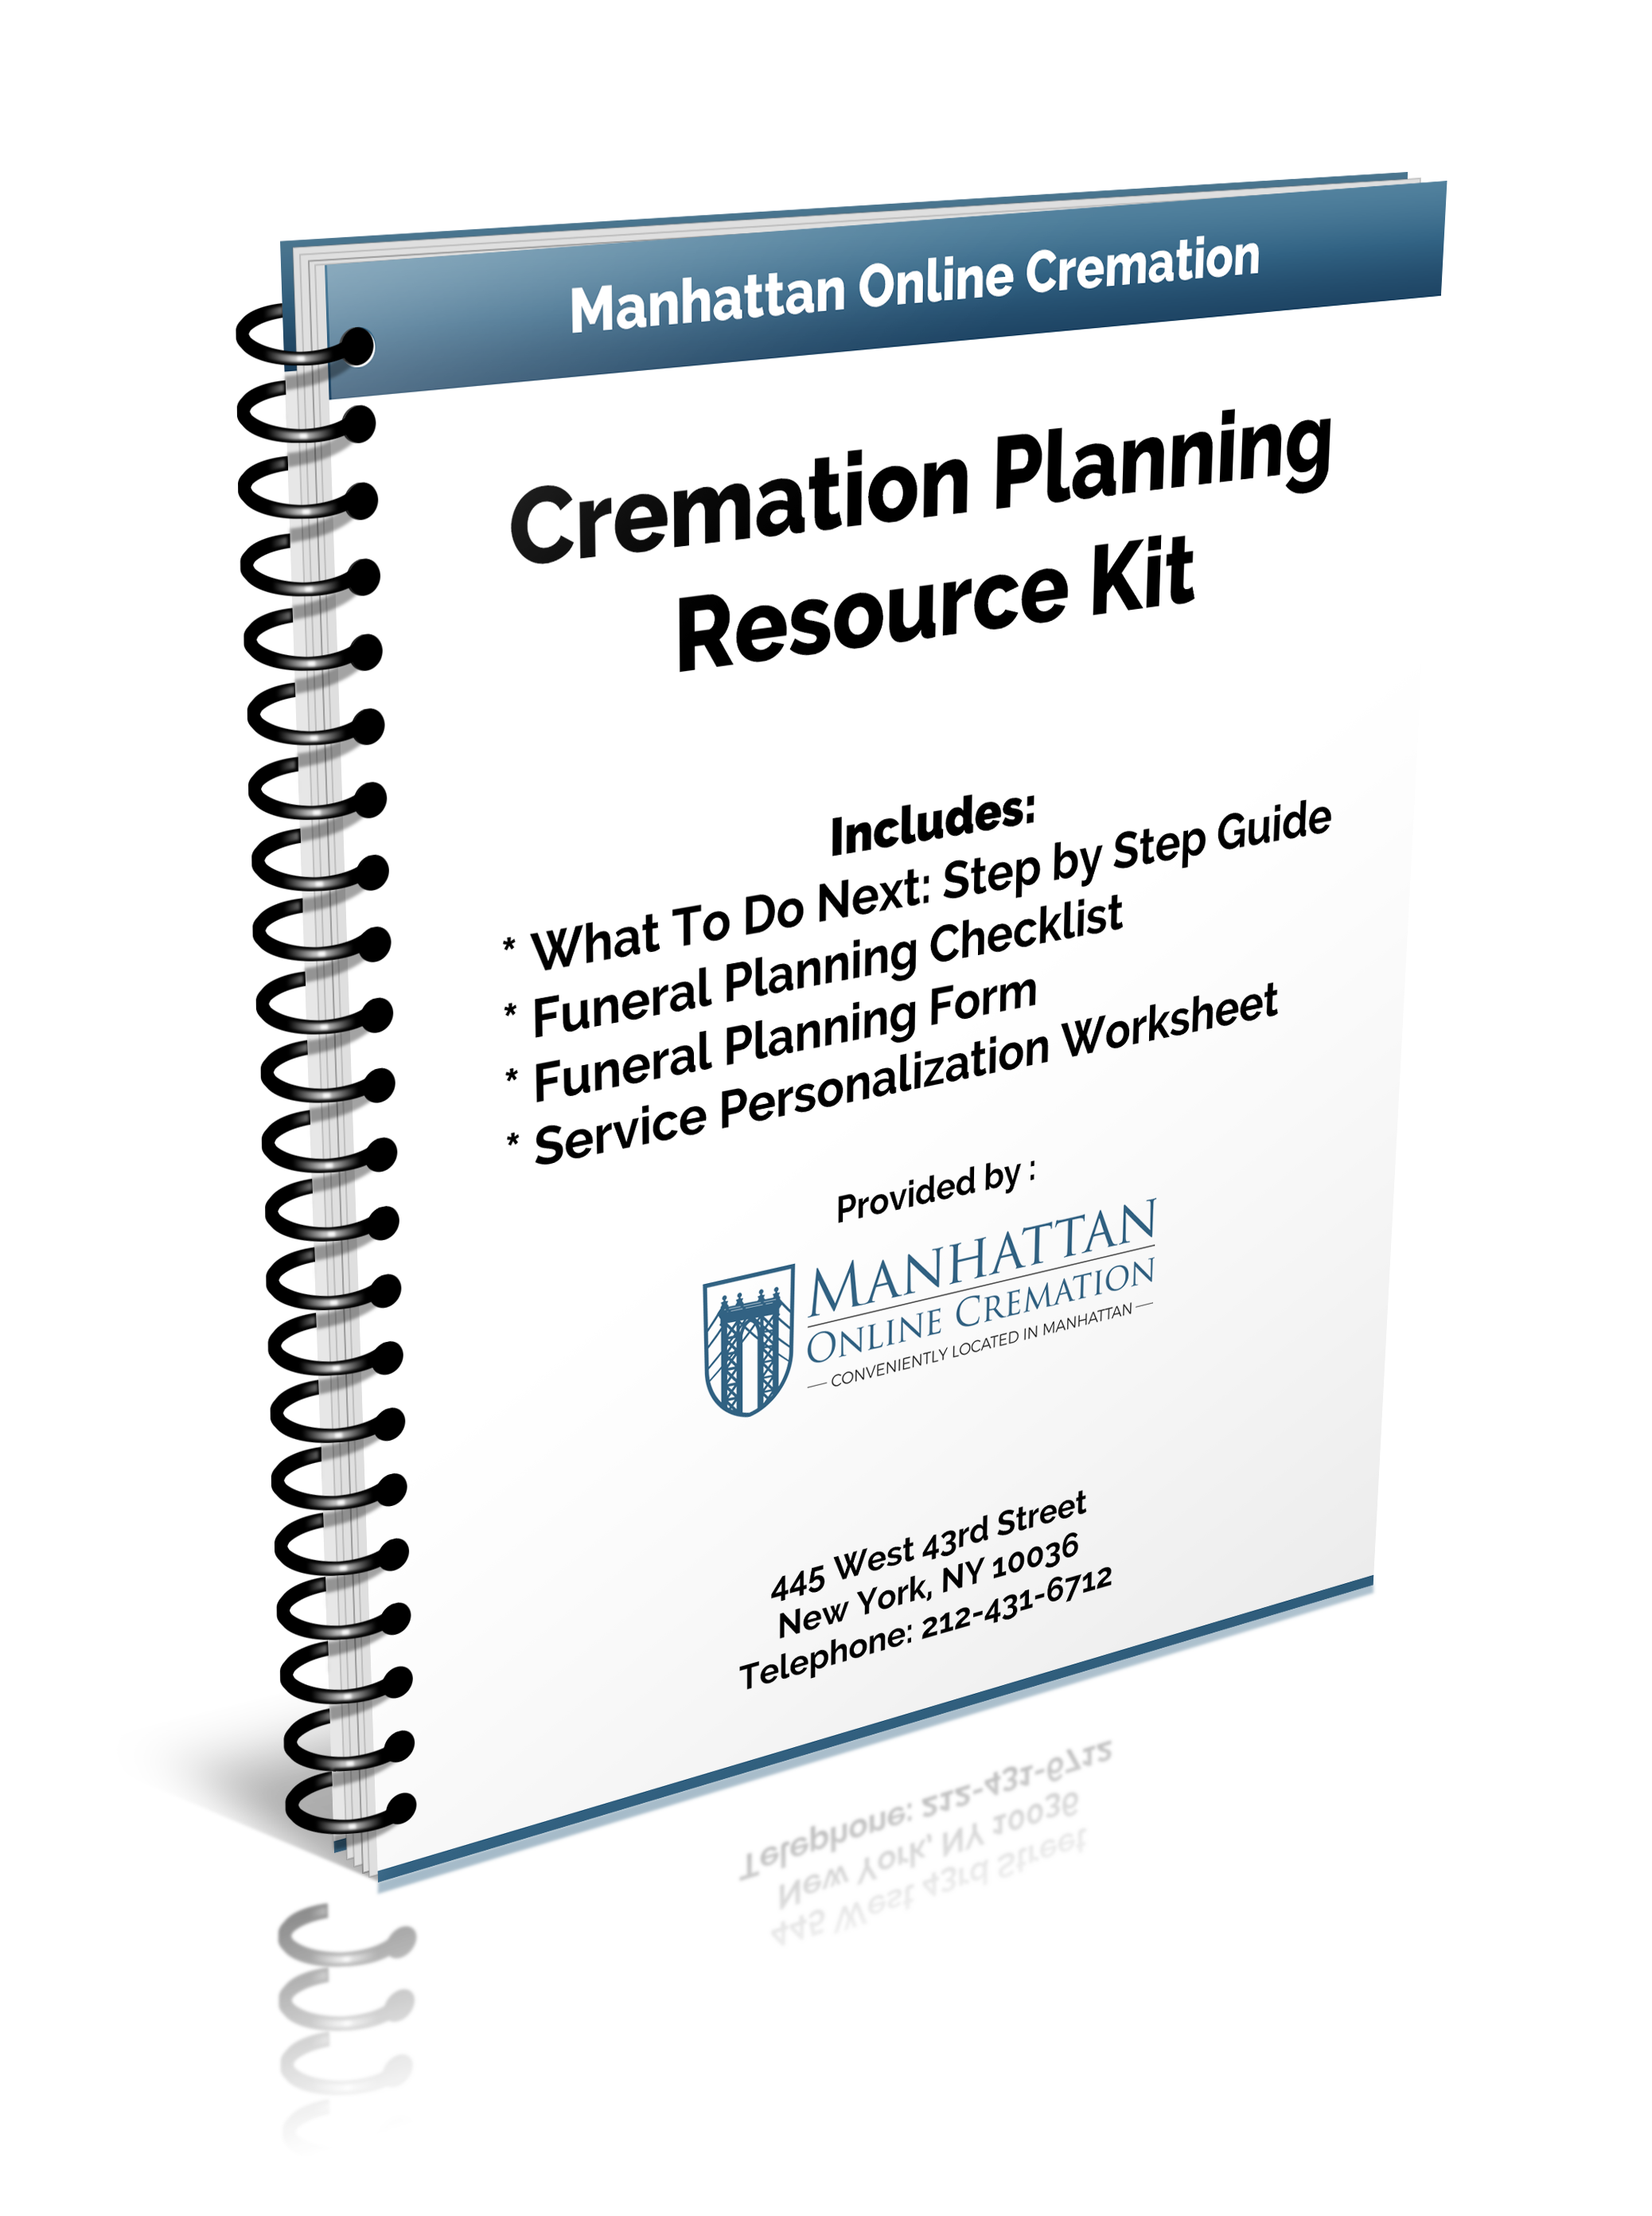 Picture of a cremation planning resource kit